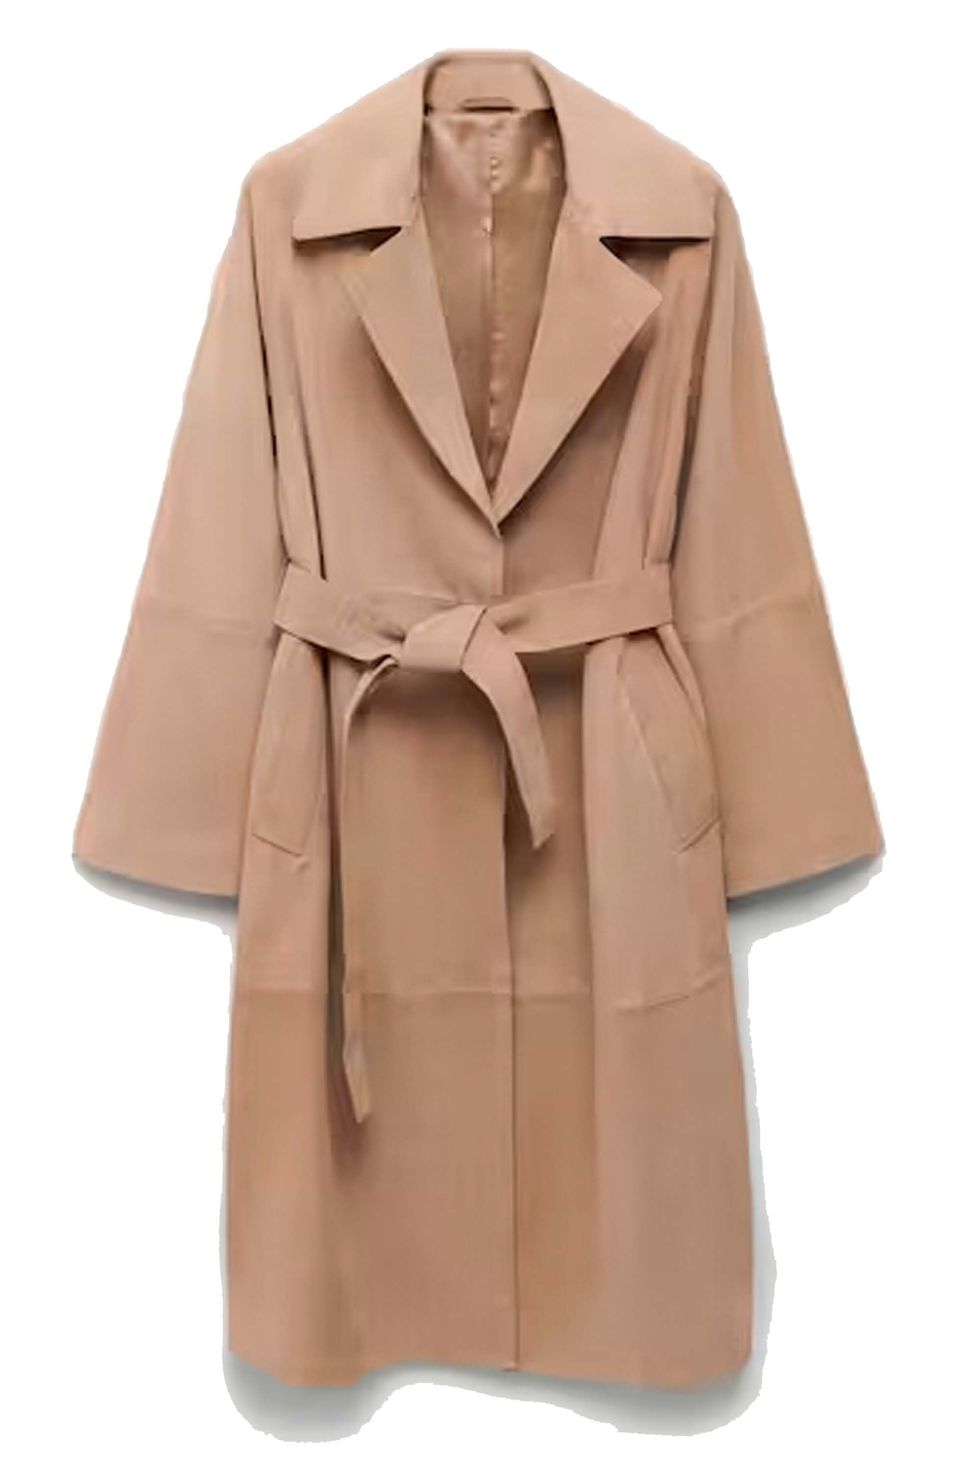 Mango suede trench